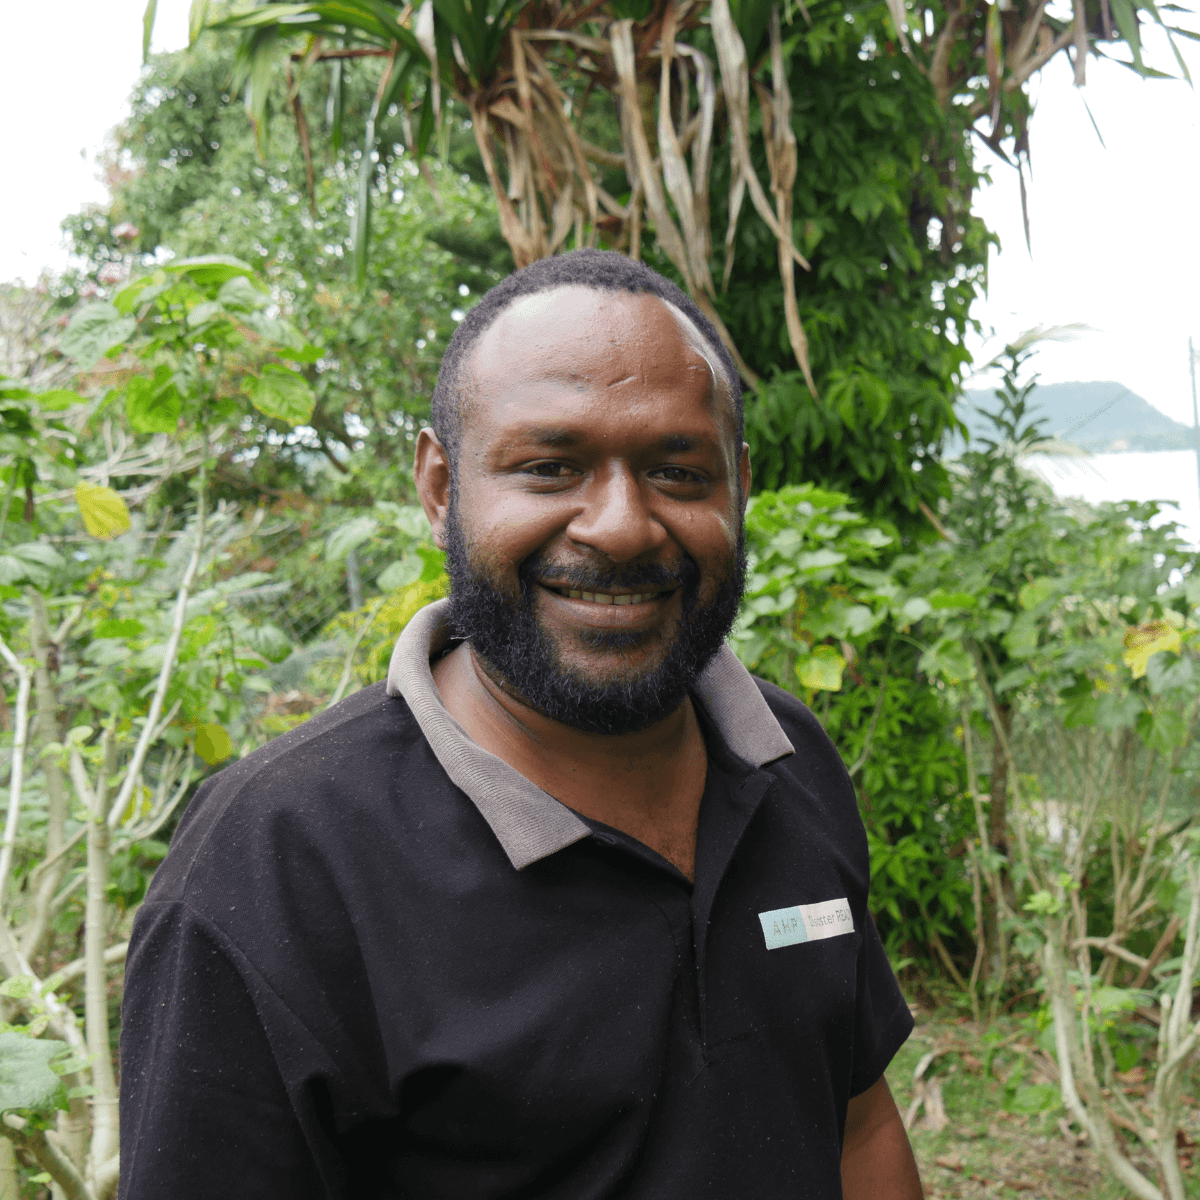 Port Vila, Vanuatu: George has been working with Oxfam in Vanuatu for four years and is coordinating the Vanuatu Climate Action Network. Oxfam acknowledges the support of the Australian Government through the Australian NGO Cooperation Program (ANCP). Photo: Rachel Schaevitz/Oxfam.